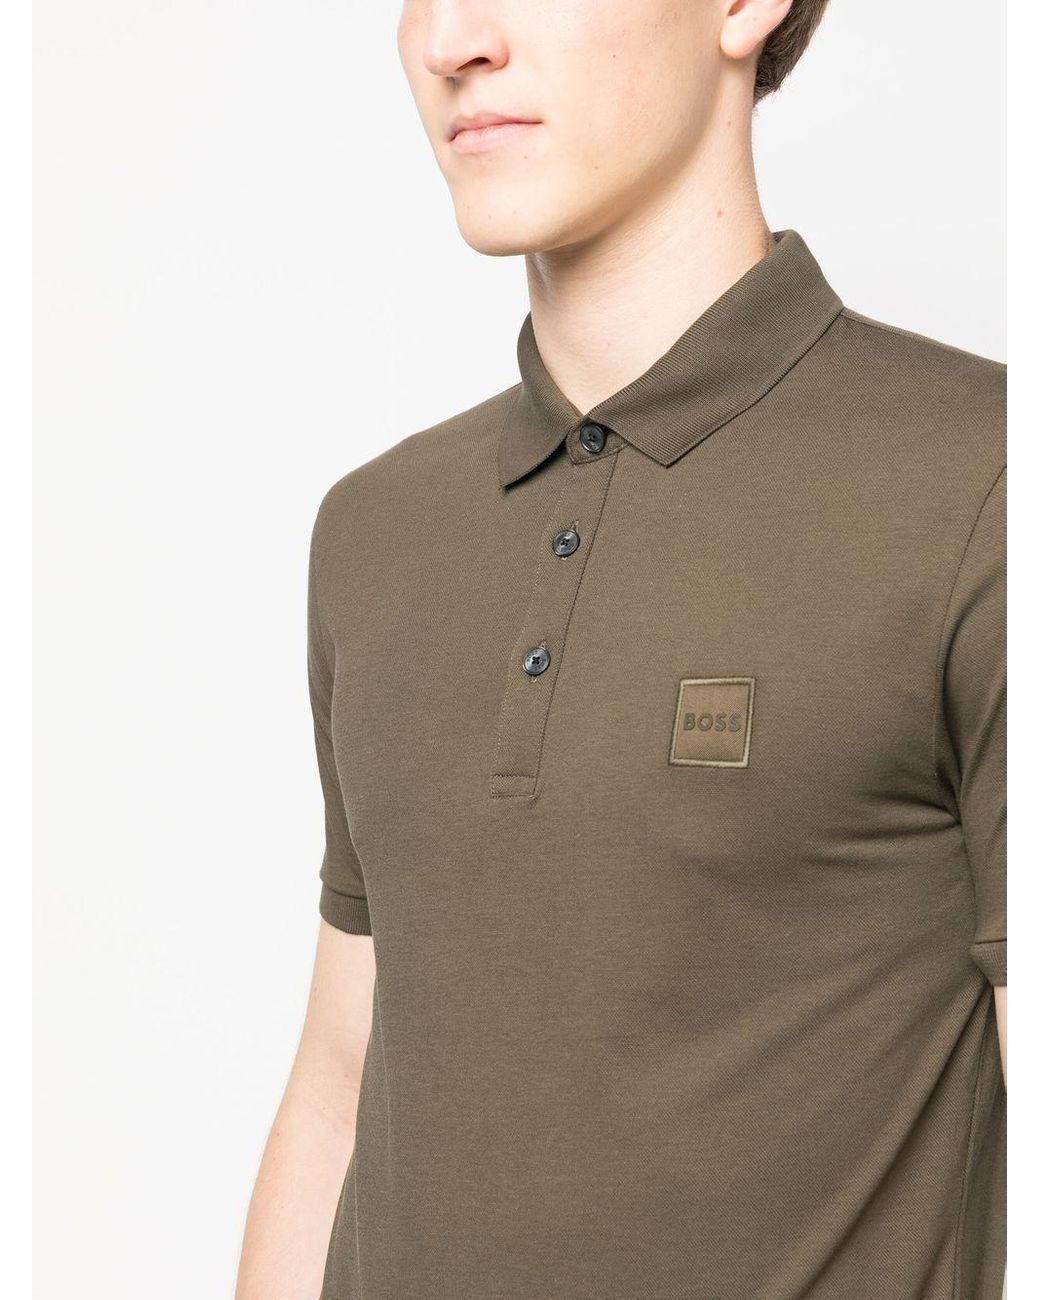 BOSS by HUGO BOSS Logo-patch Cotton Polo Shirt in Green for Men | Lyst